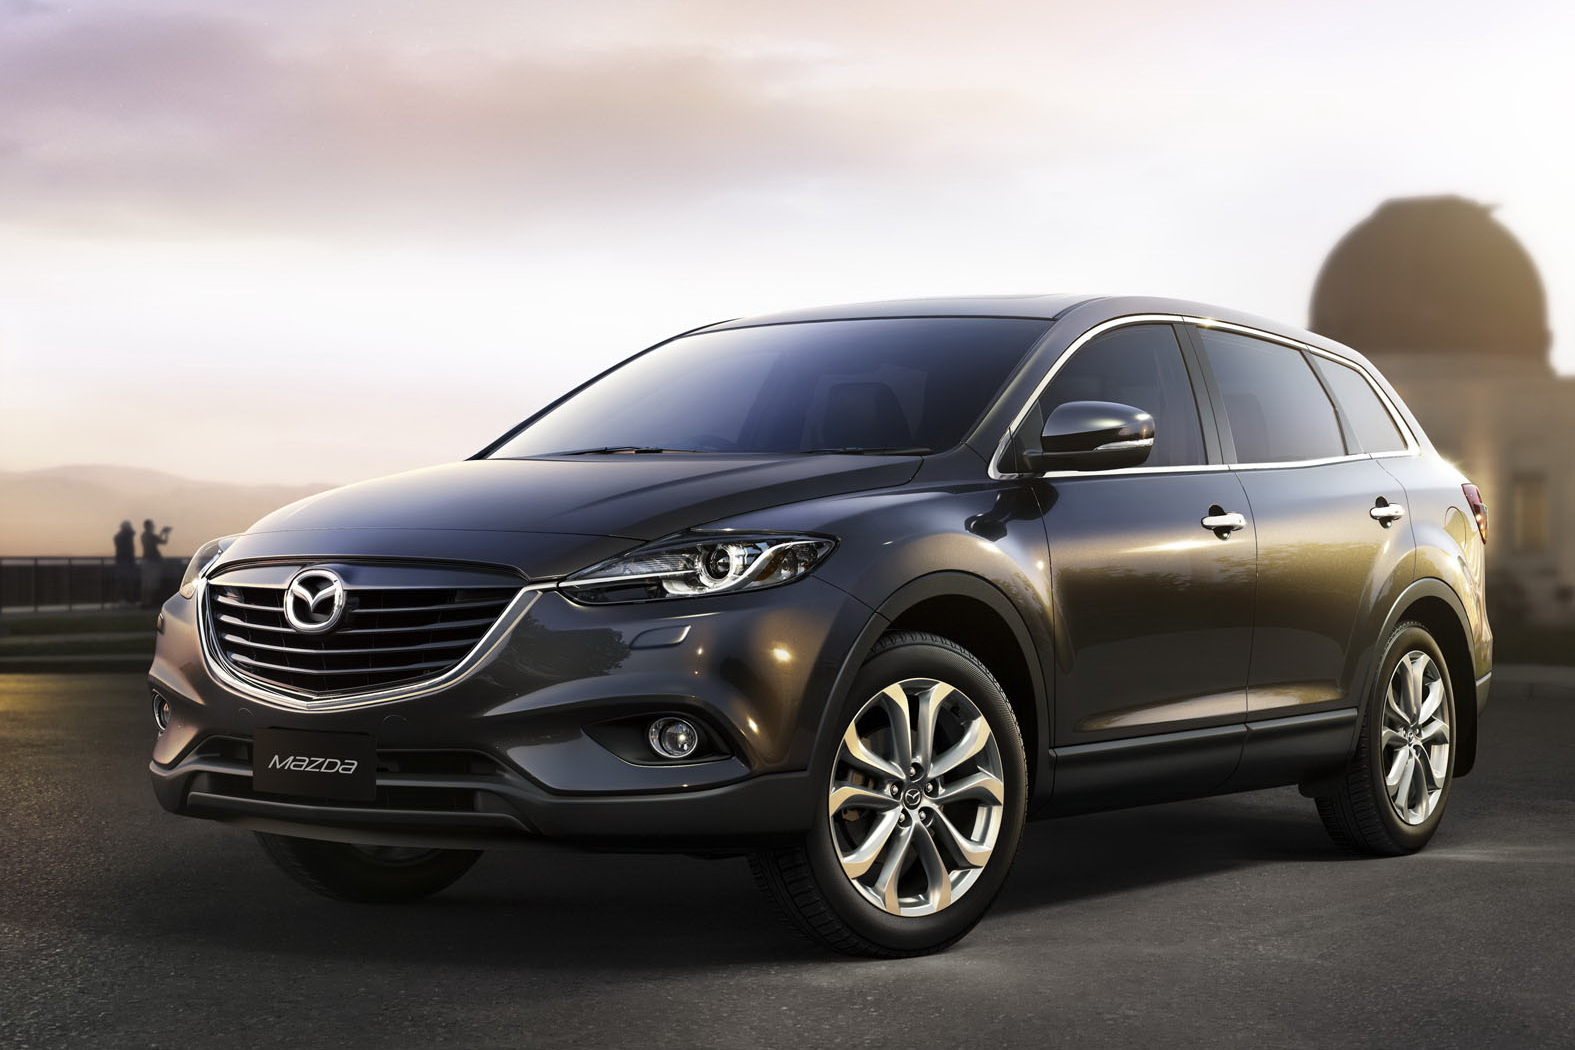 2013 Mazda CX-9 World Premiere. Looks like mainly a cosmetic update for now.